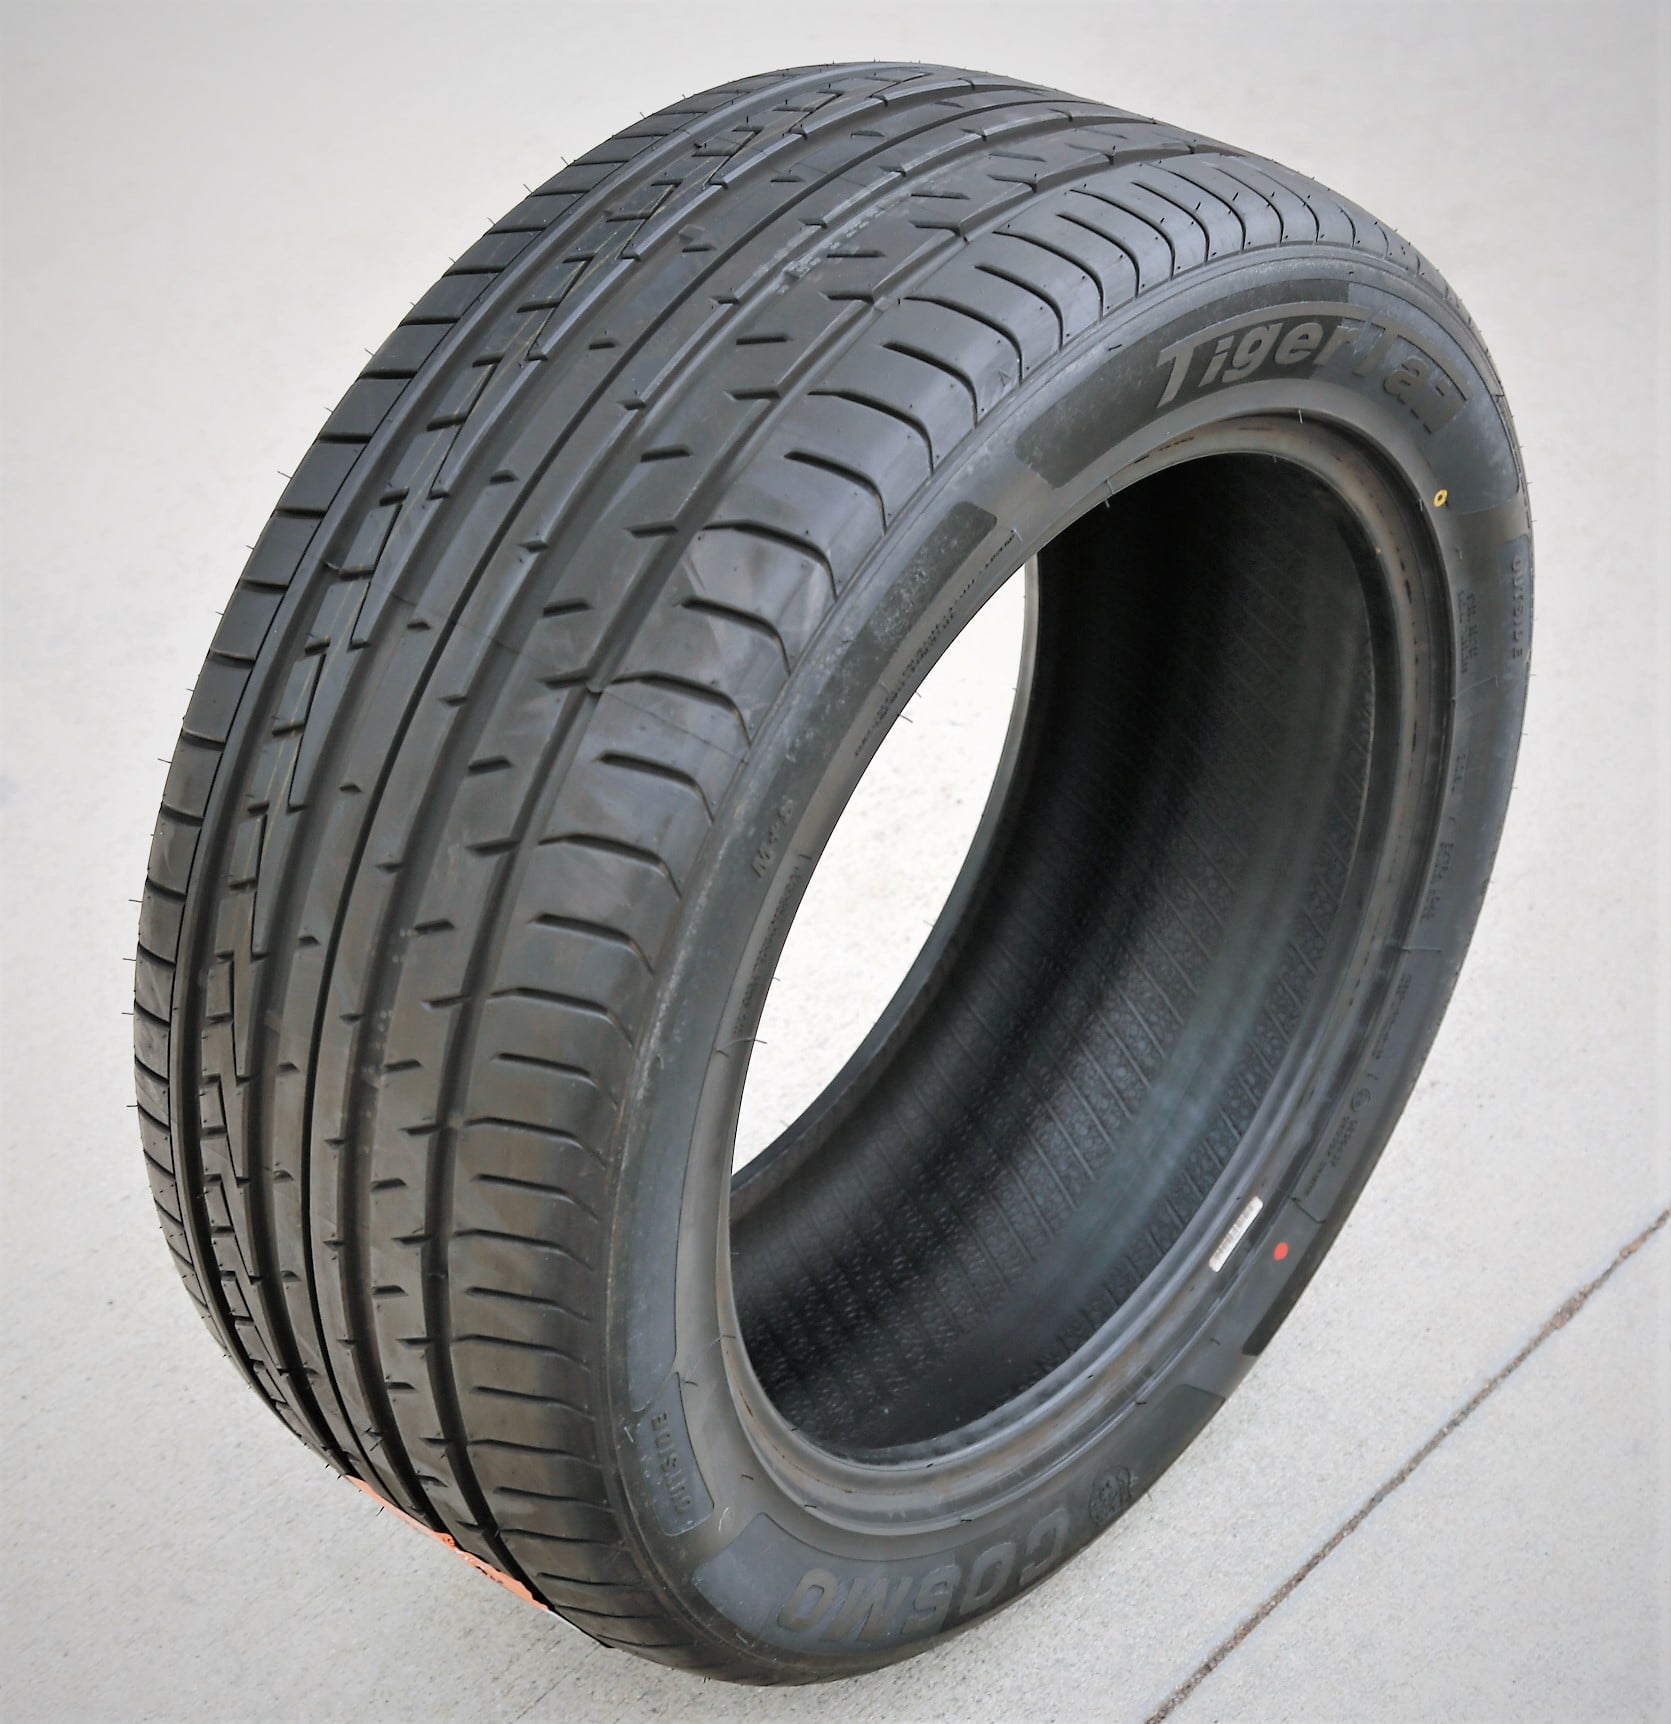 Cosmo TigerTail 275/40ZR20 106Y XL A/S High Performance Tire